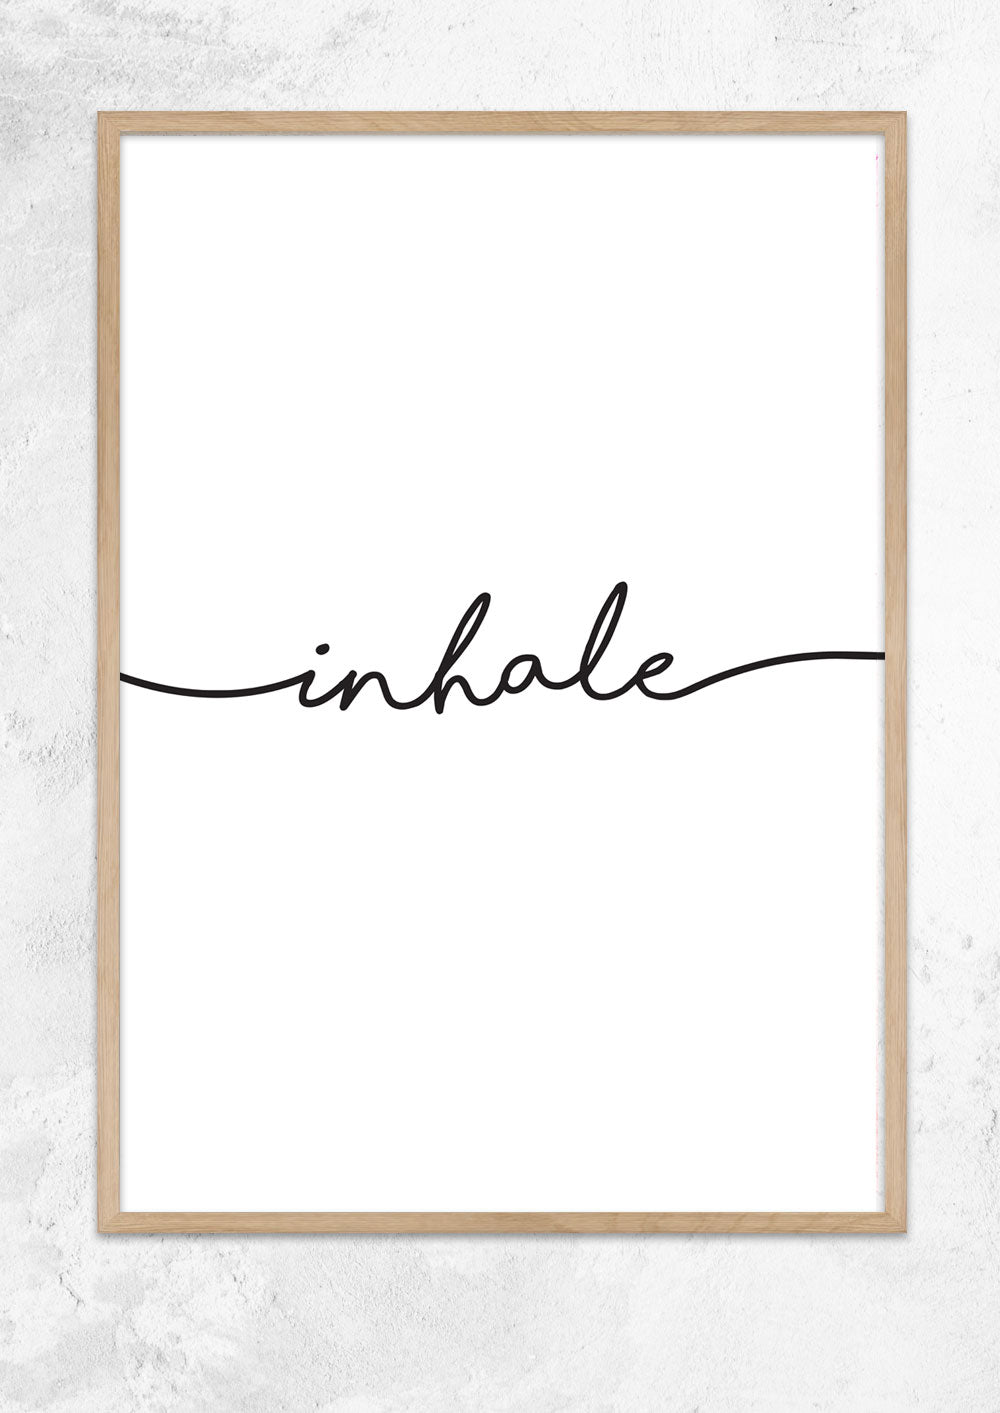 Remember to Breathe - Part 1 Inhale